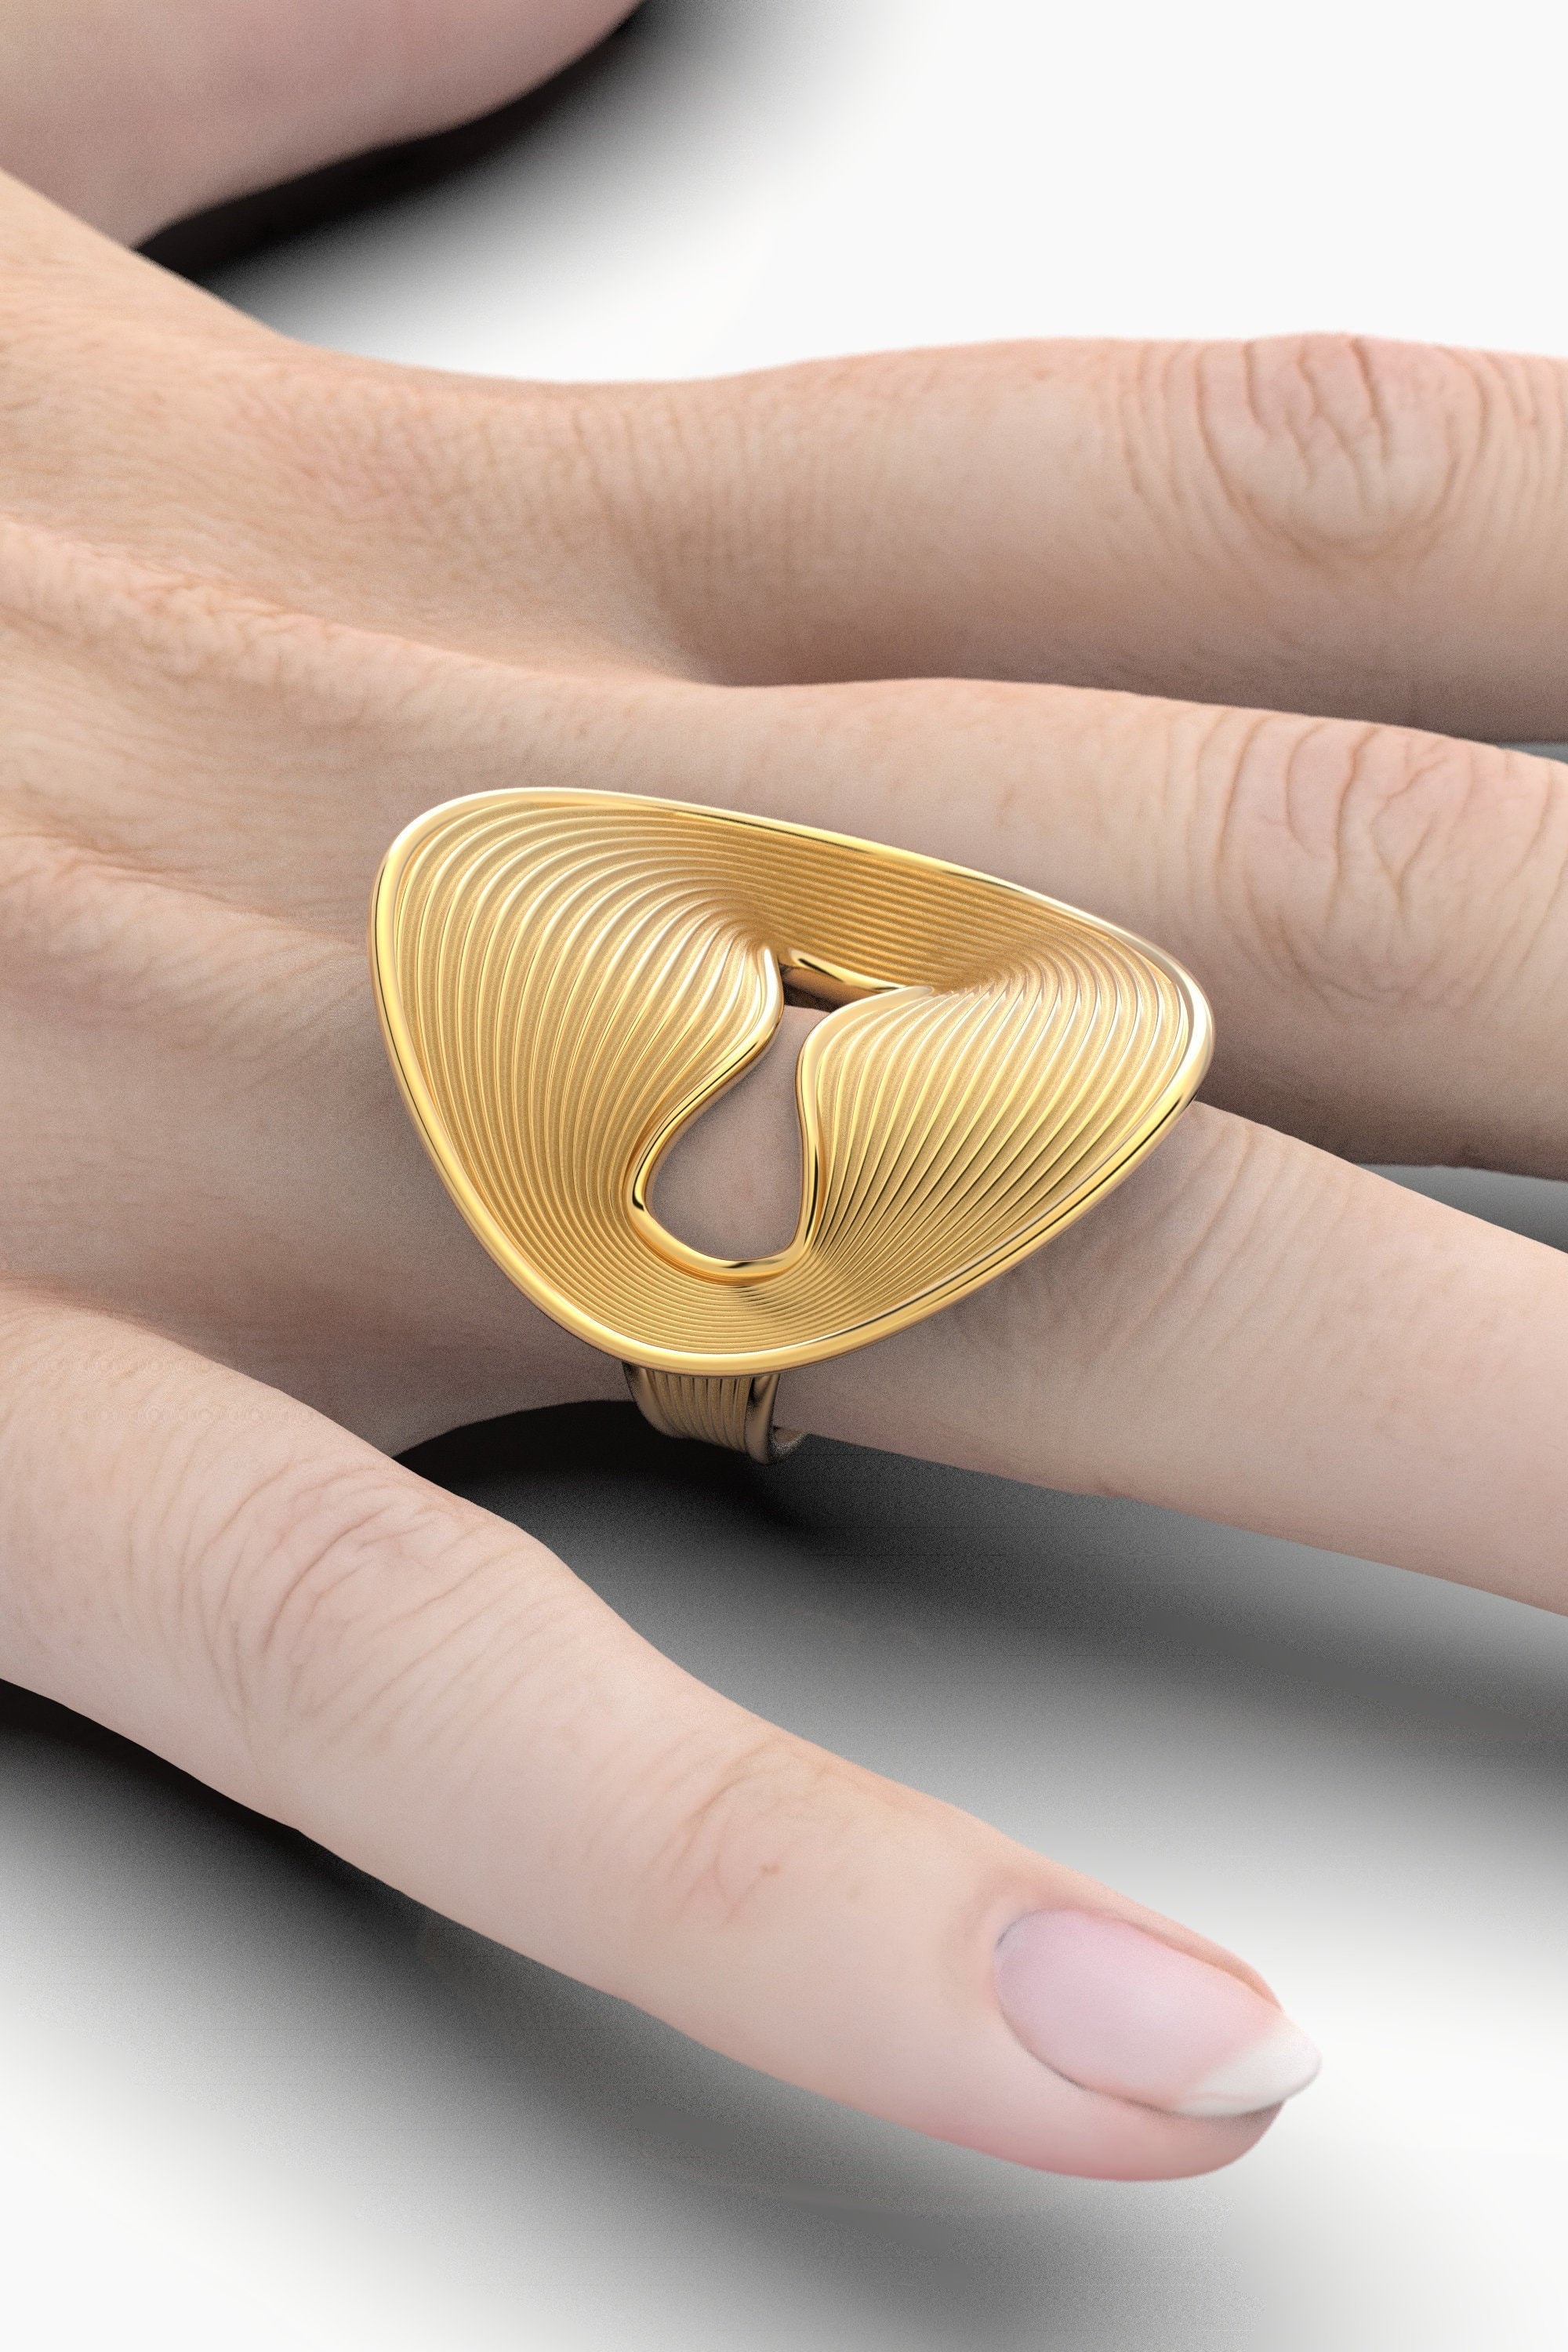 18K Gold Ring Made in Italy, Solid Statement Ring. Italian Modern Fine Jewelry